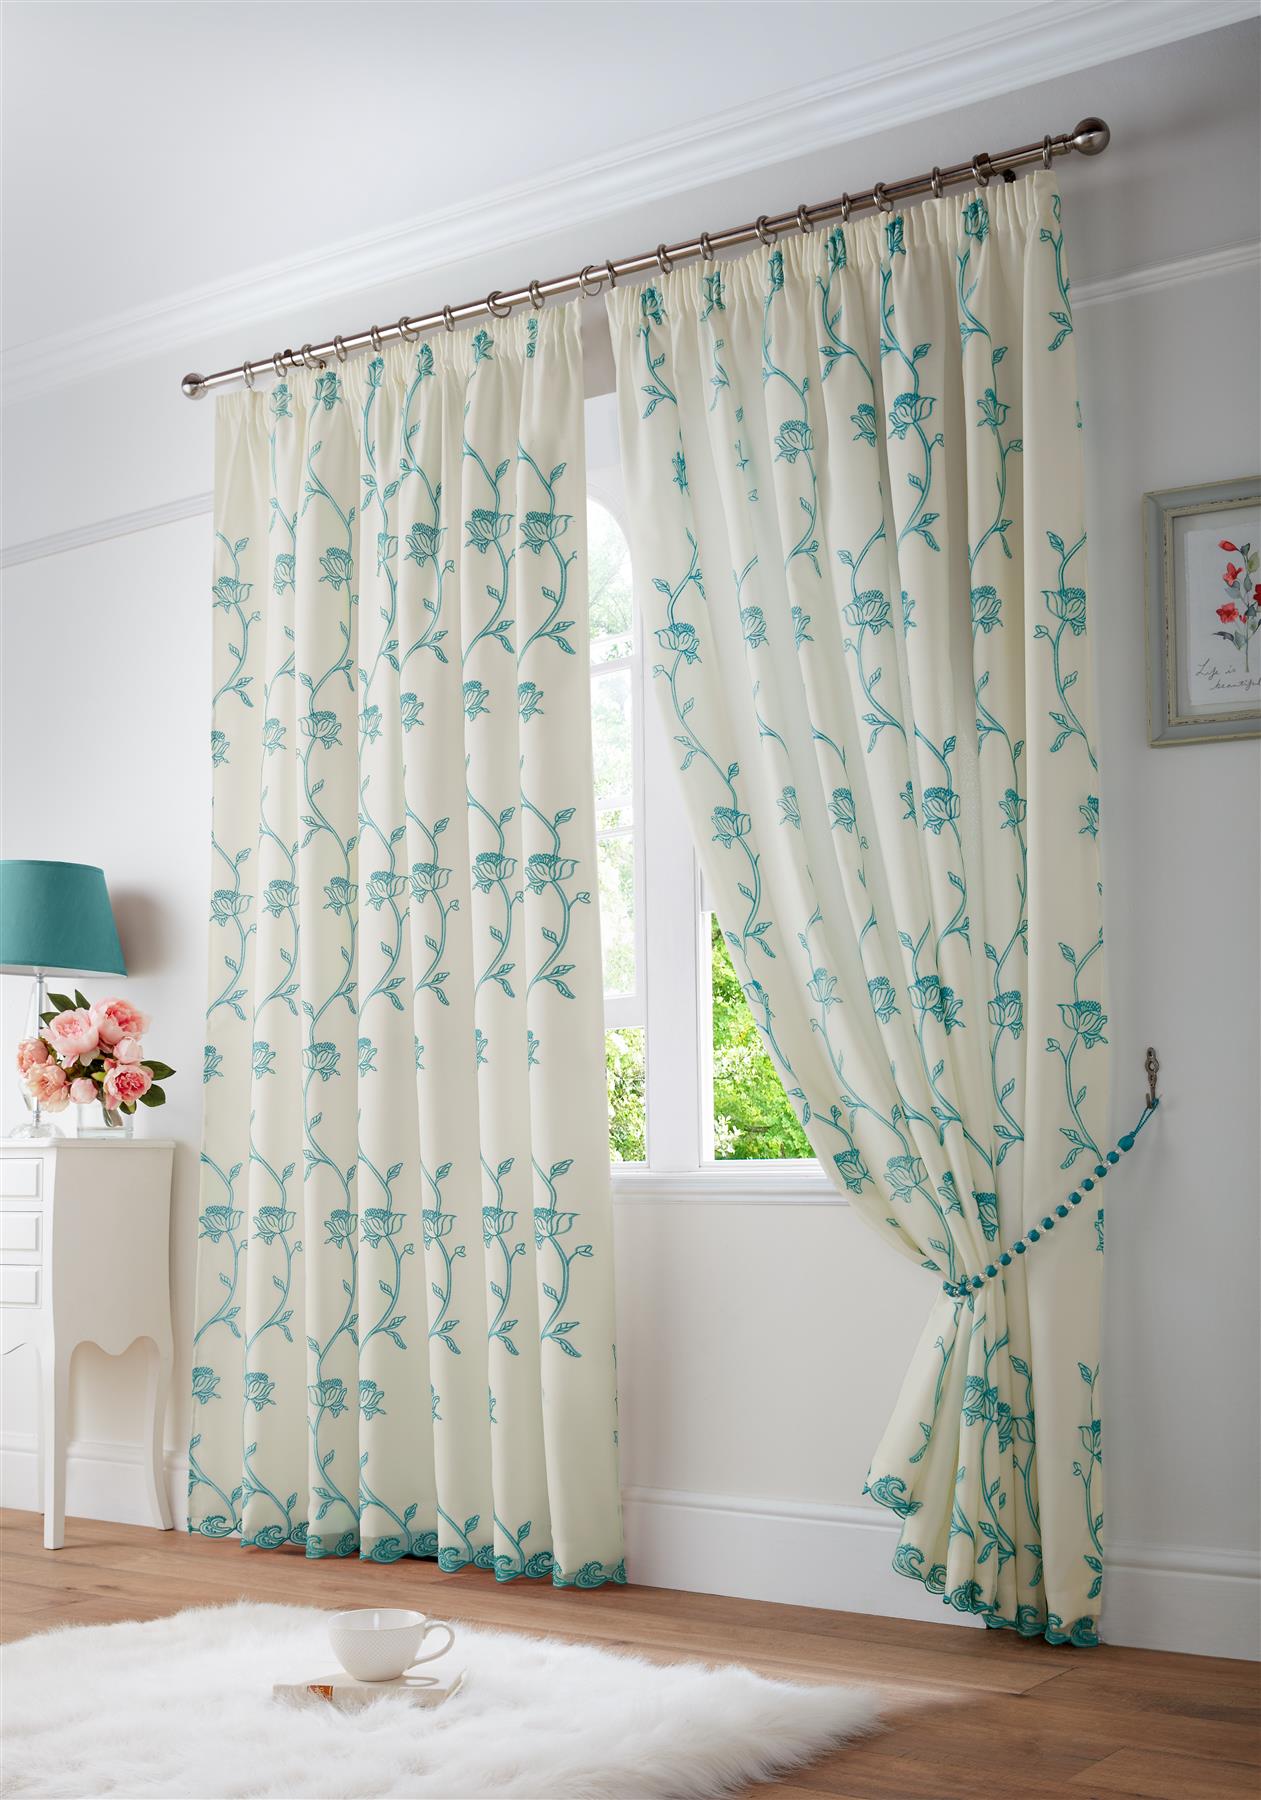 Teal Exe Fully Lined Pencil Pleat Curtains Pair.